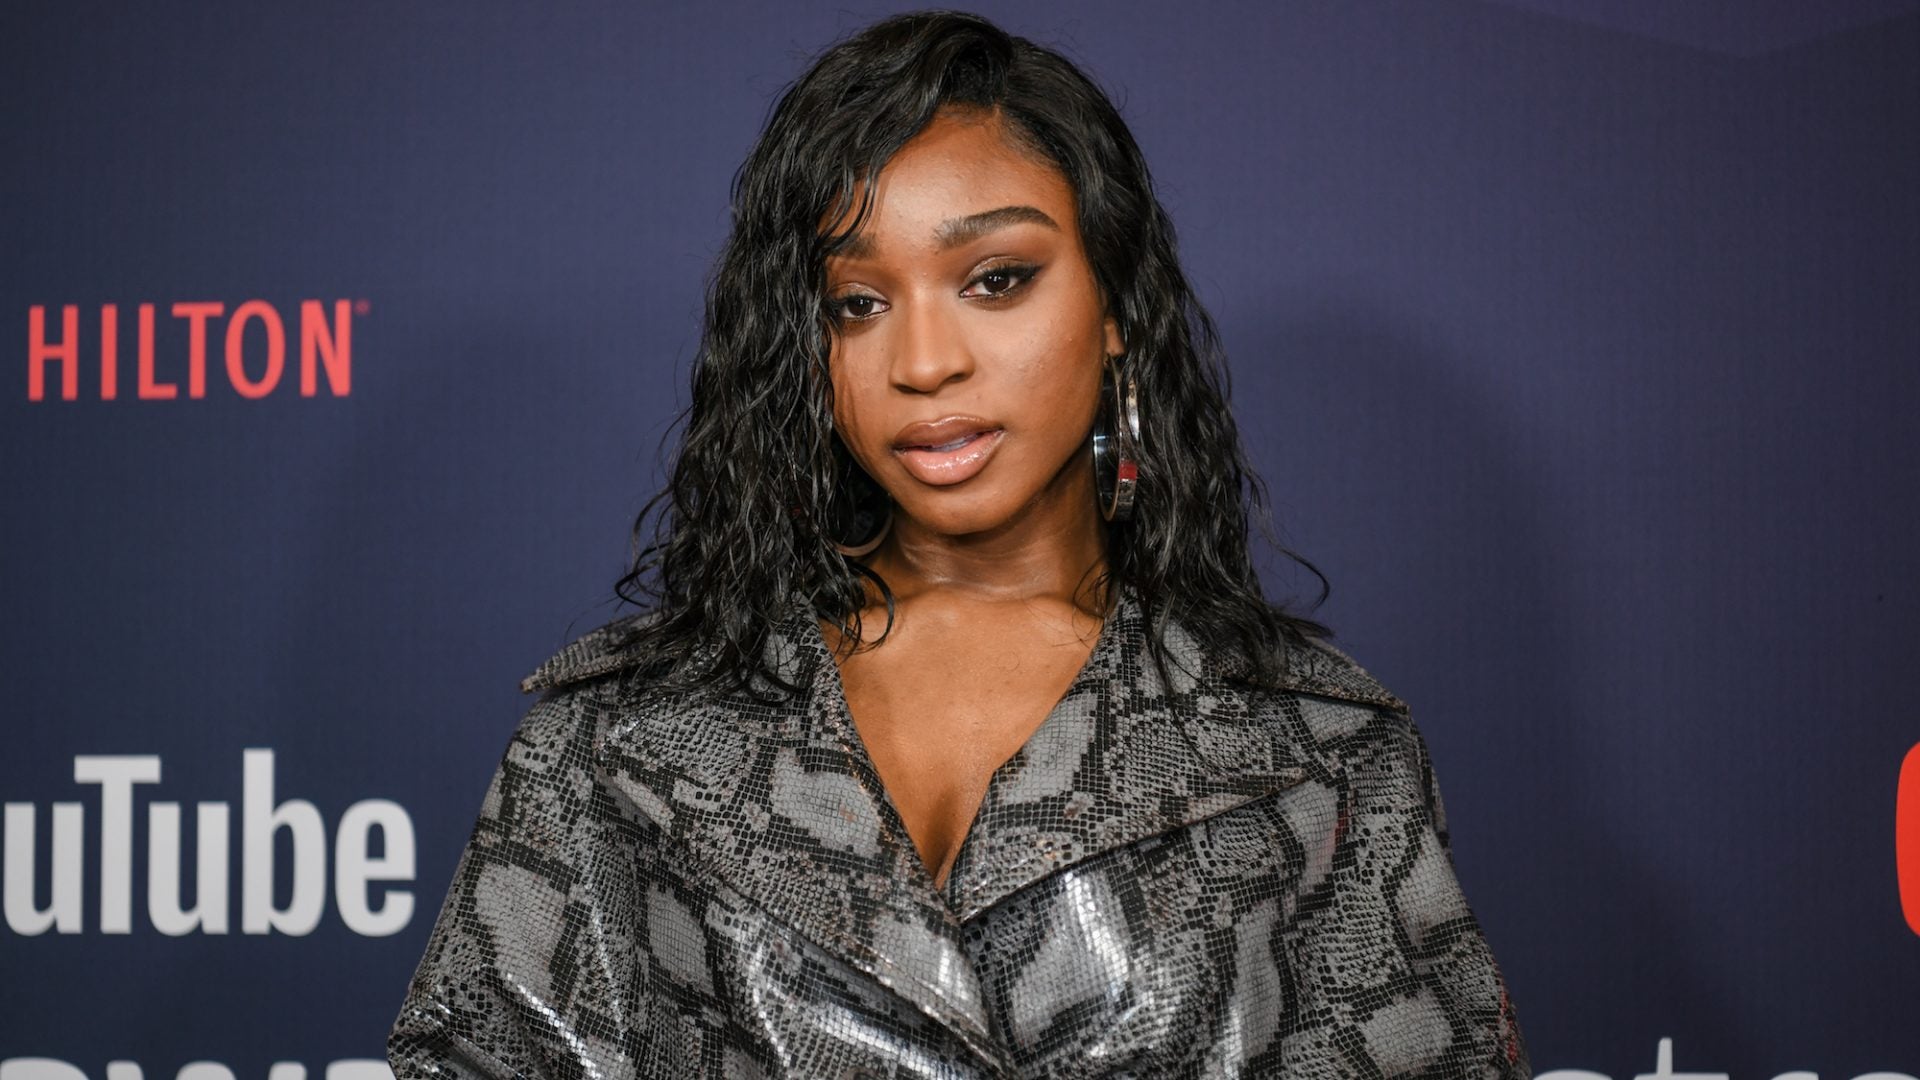 Singer Normani Opens Up About Camila Cabello's Past Racist Social Media Posts - Essence